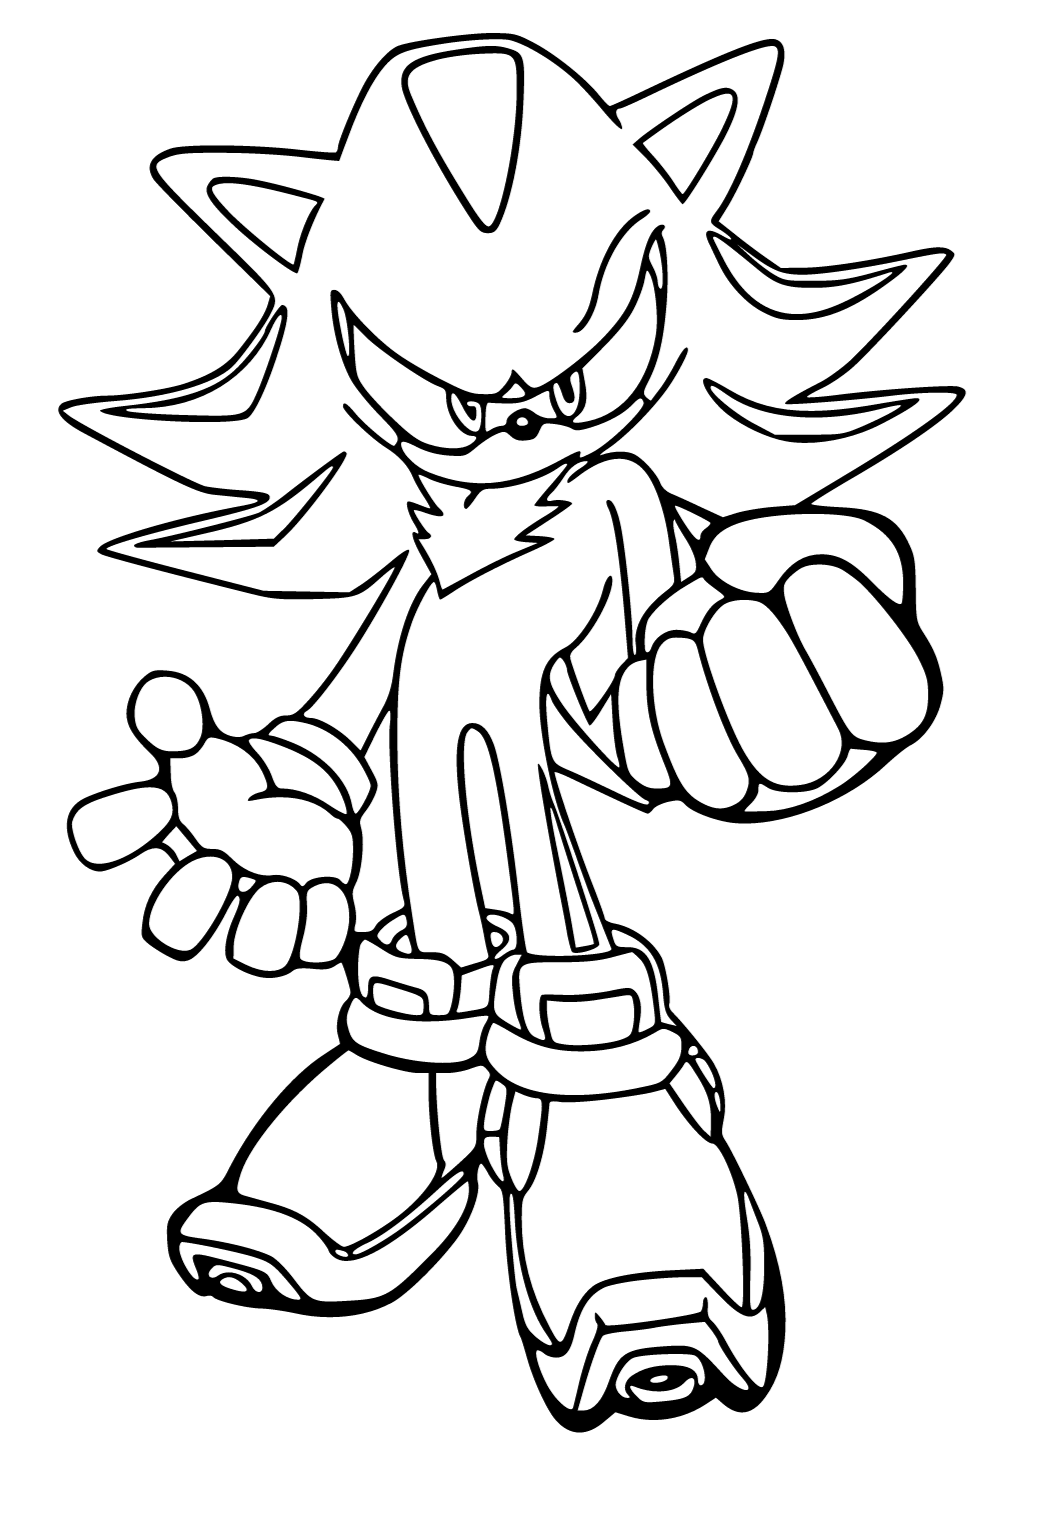 Free printable shadow the hedgehog fist coloring page for adults and kids